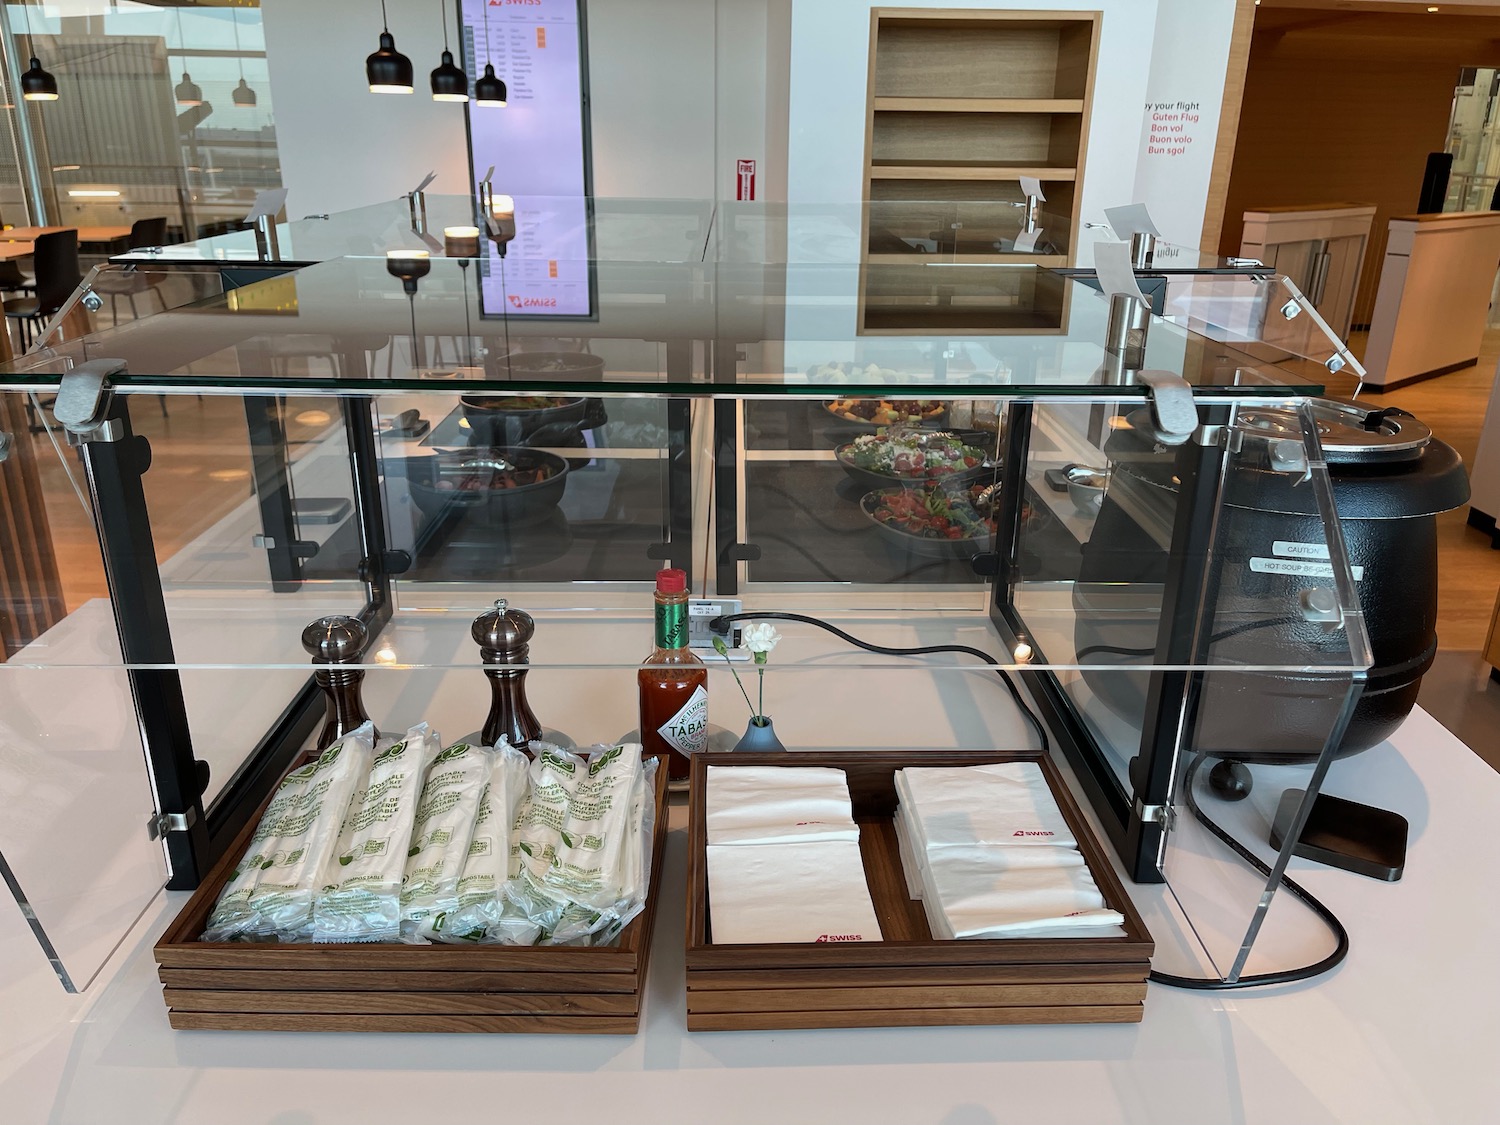 a glass display case with food items on it